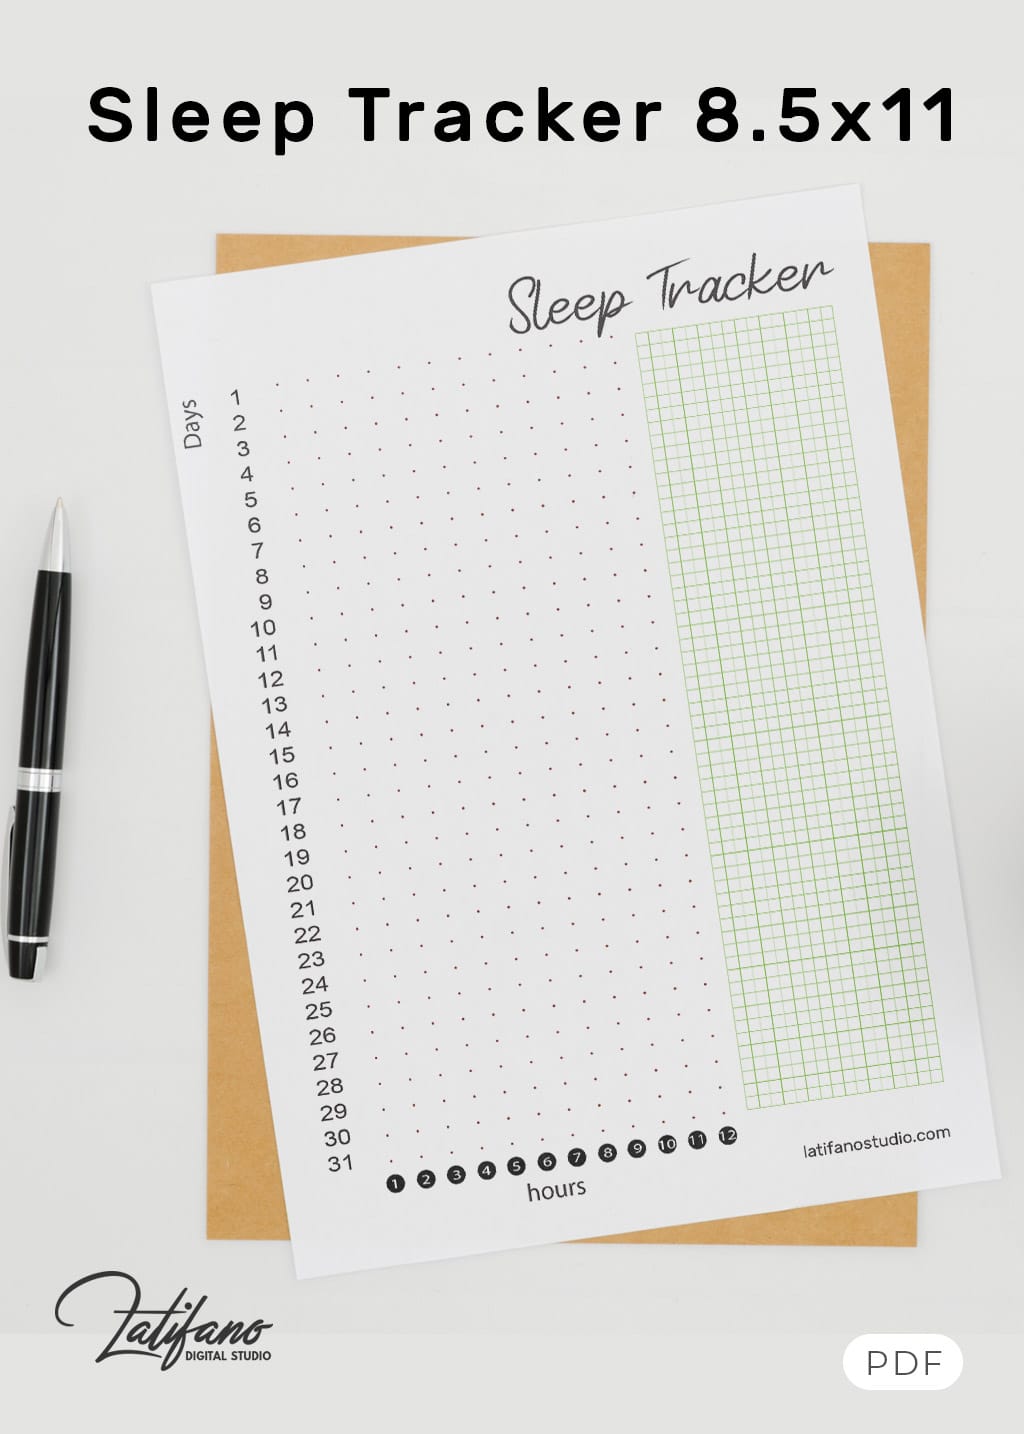 Free printable Sleep Tracker - Free Printables coloring pages and cards